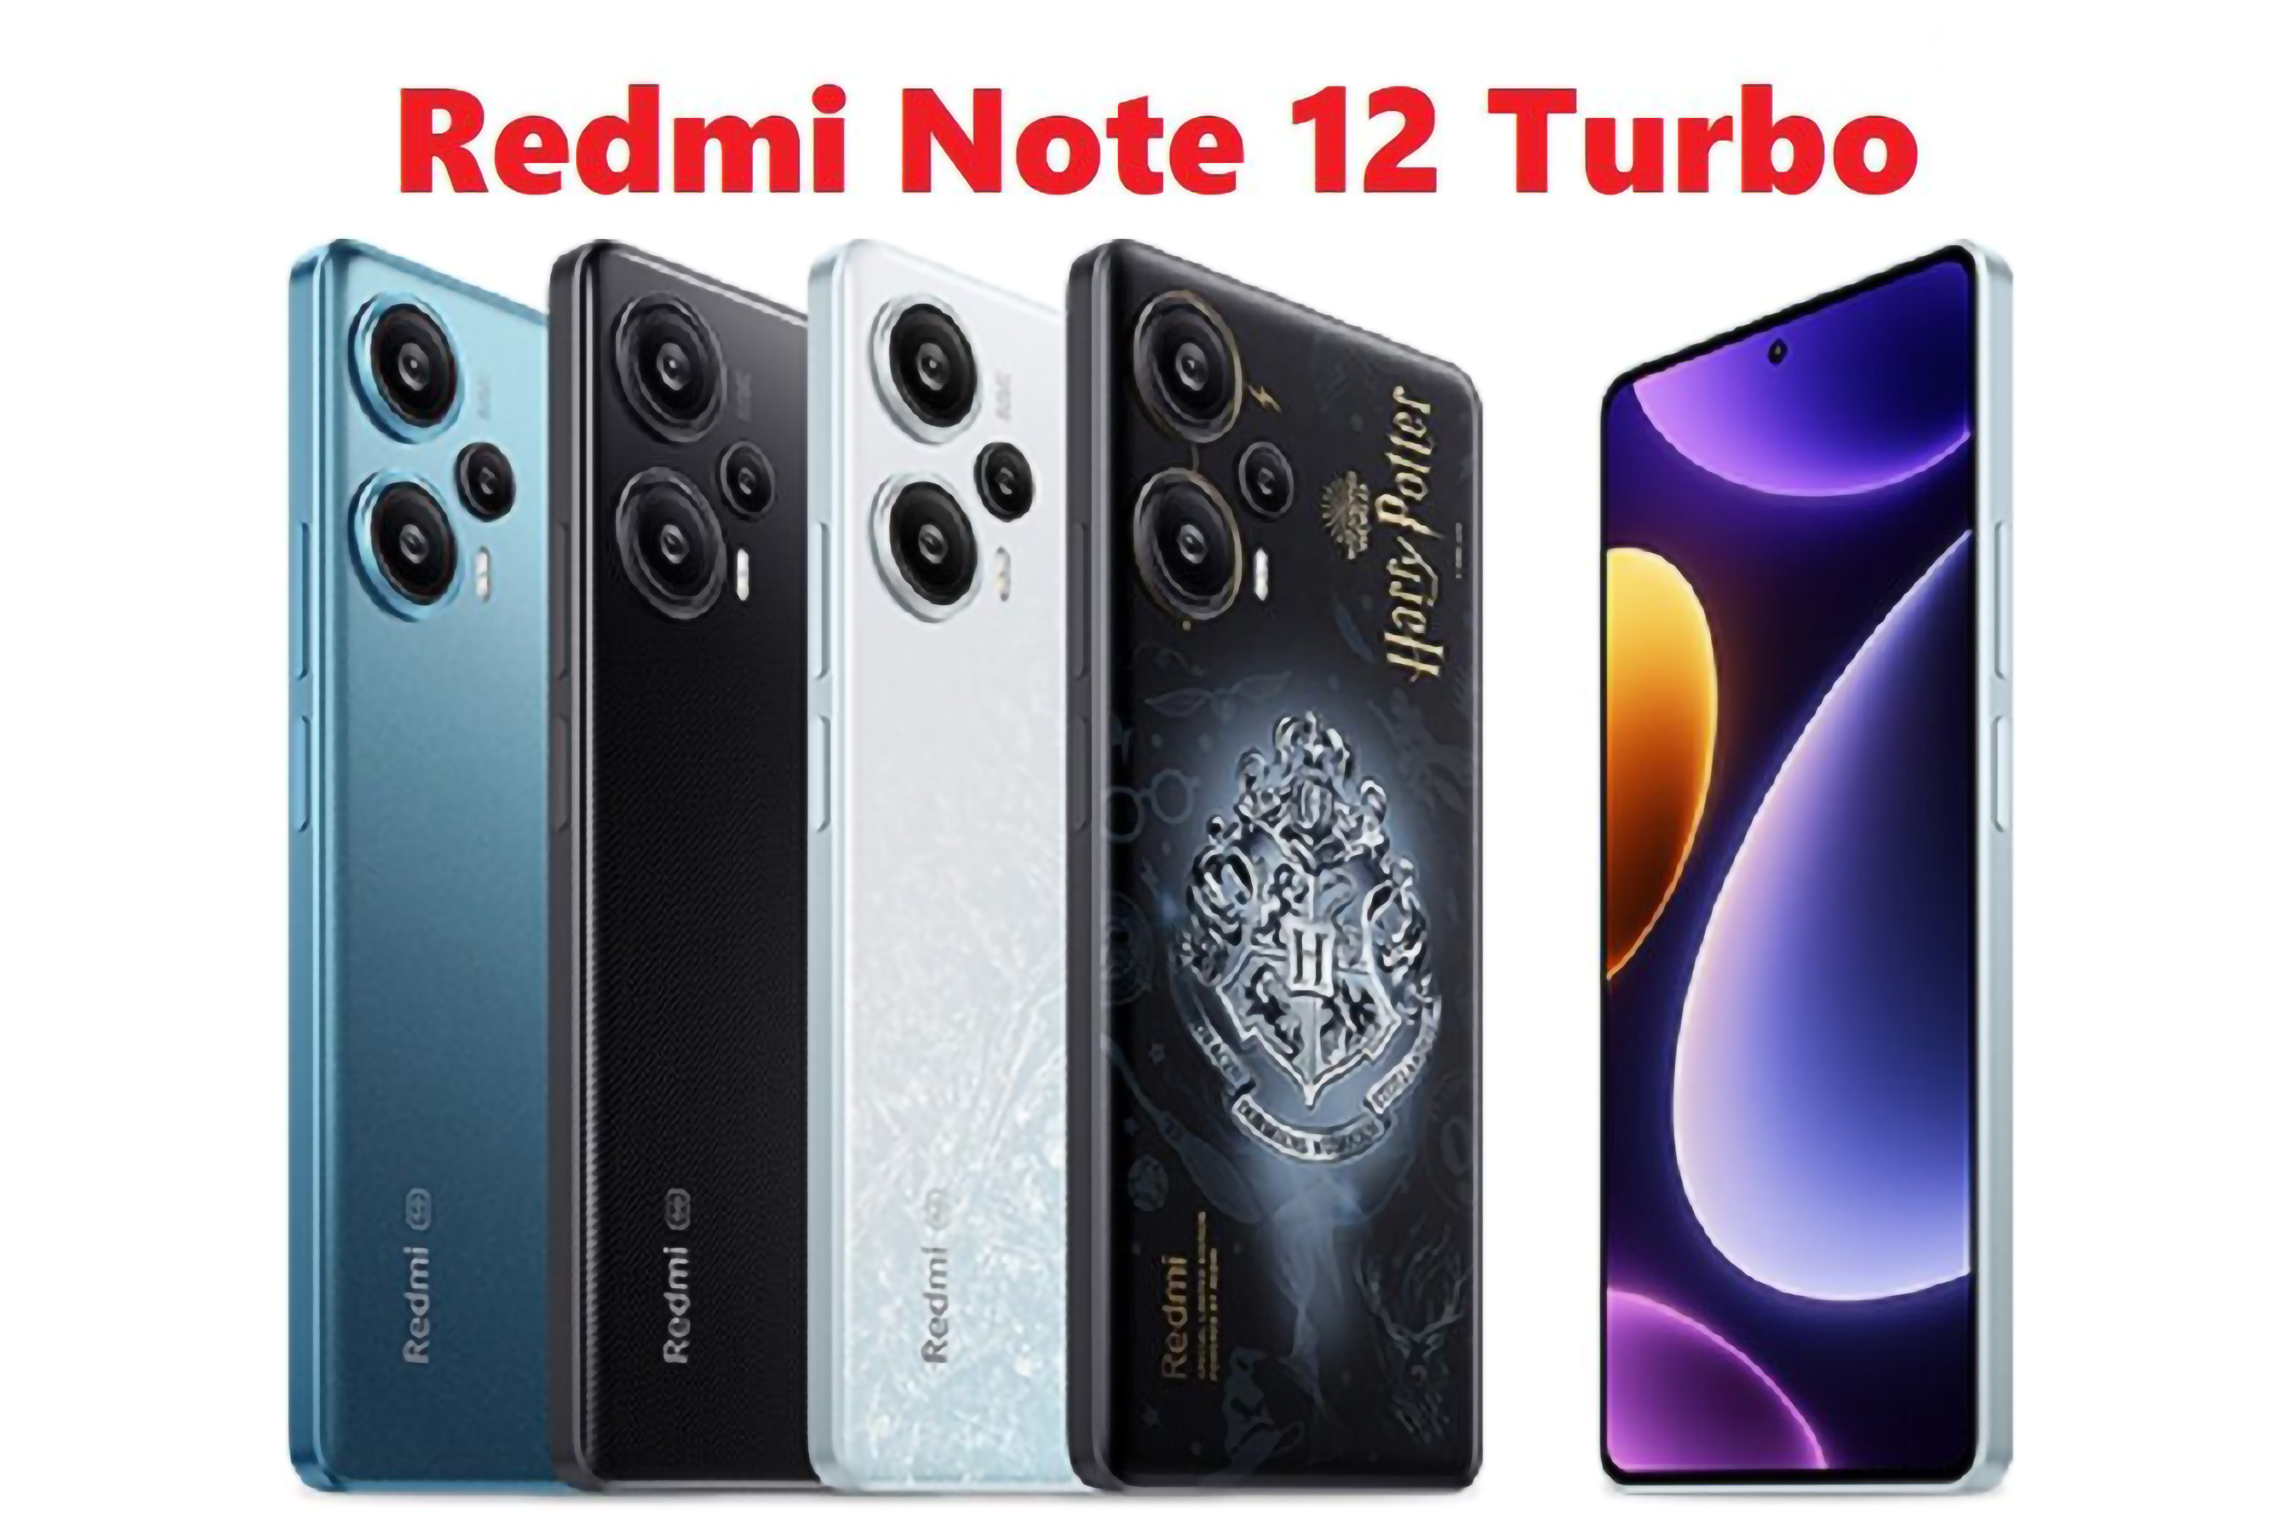  Redmi Note 12 Turbo Review